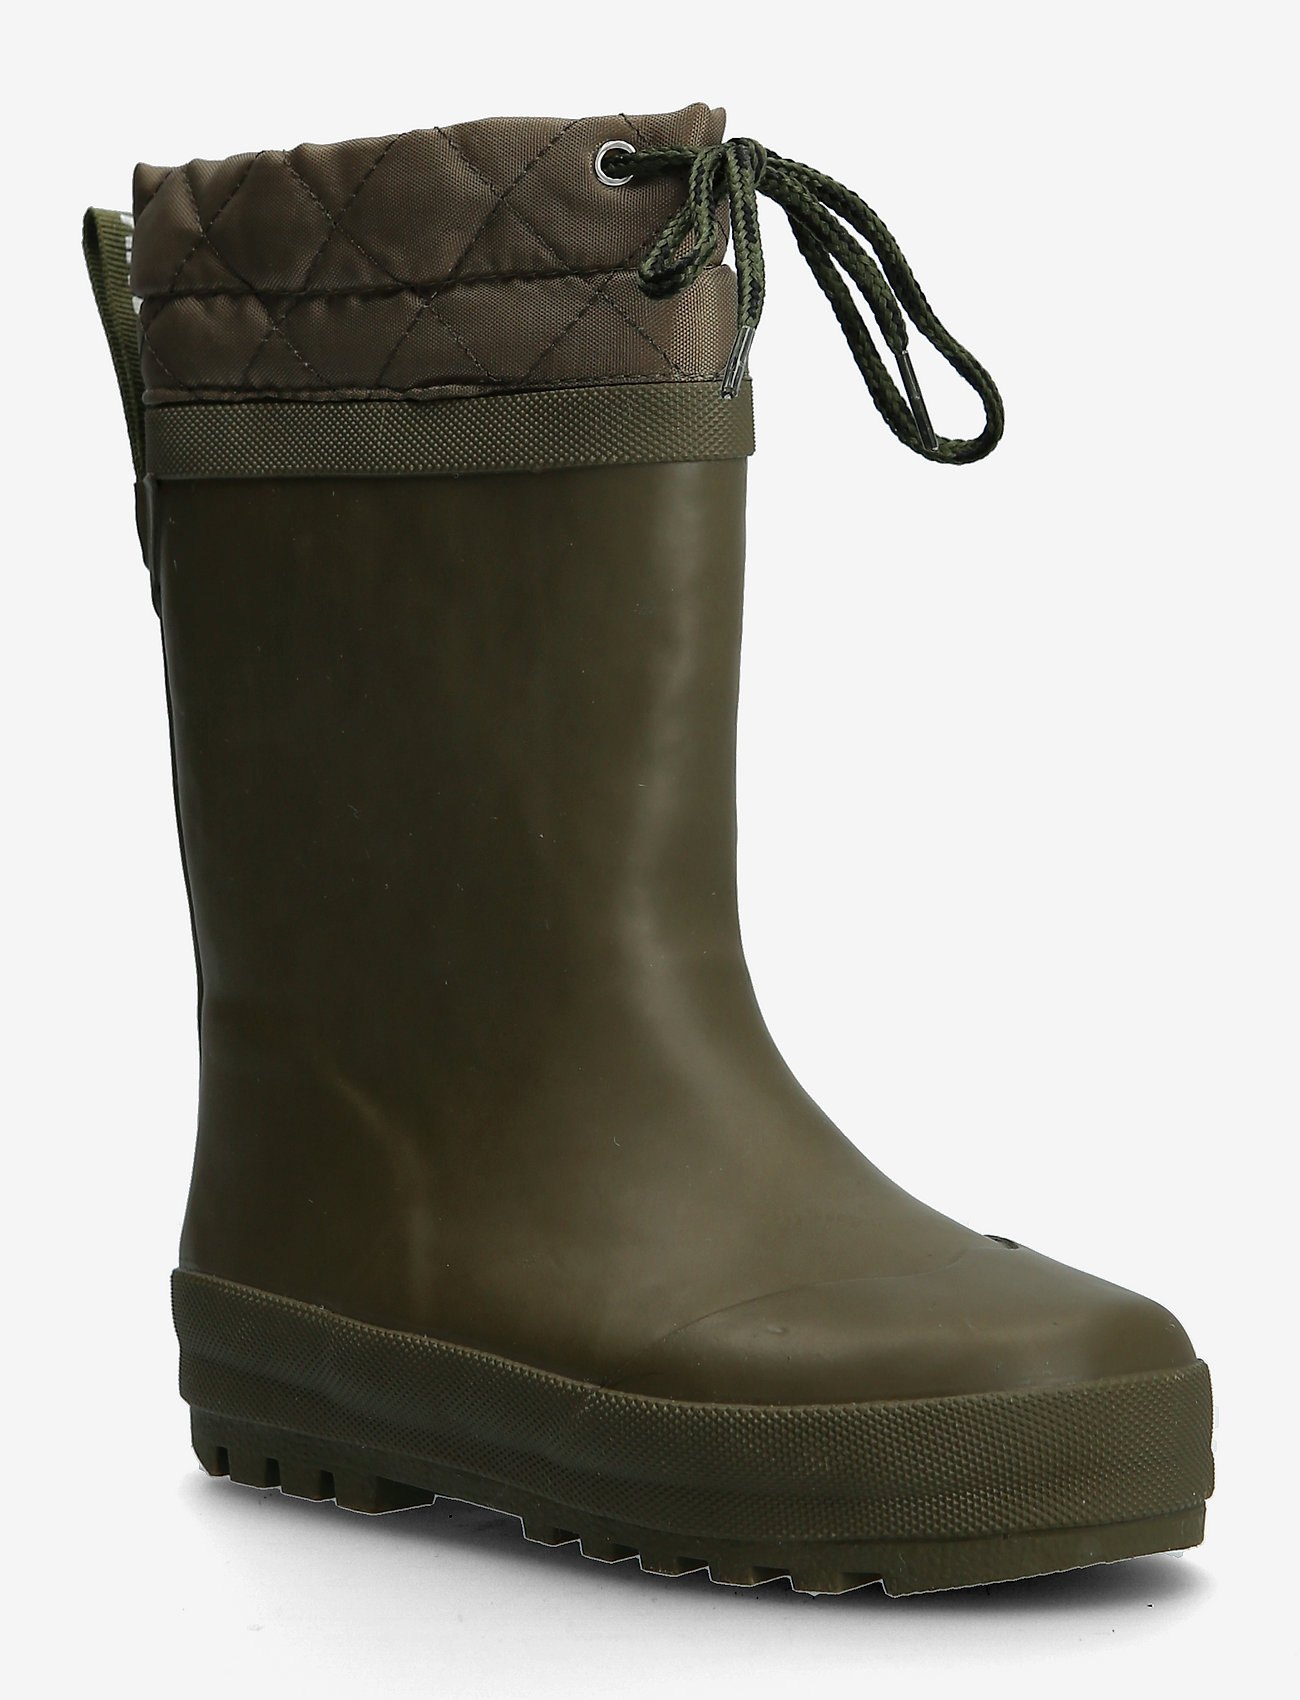 ANGULUS - Rainboots with woollining - lined rubberboots - 0002 olive - 0